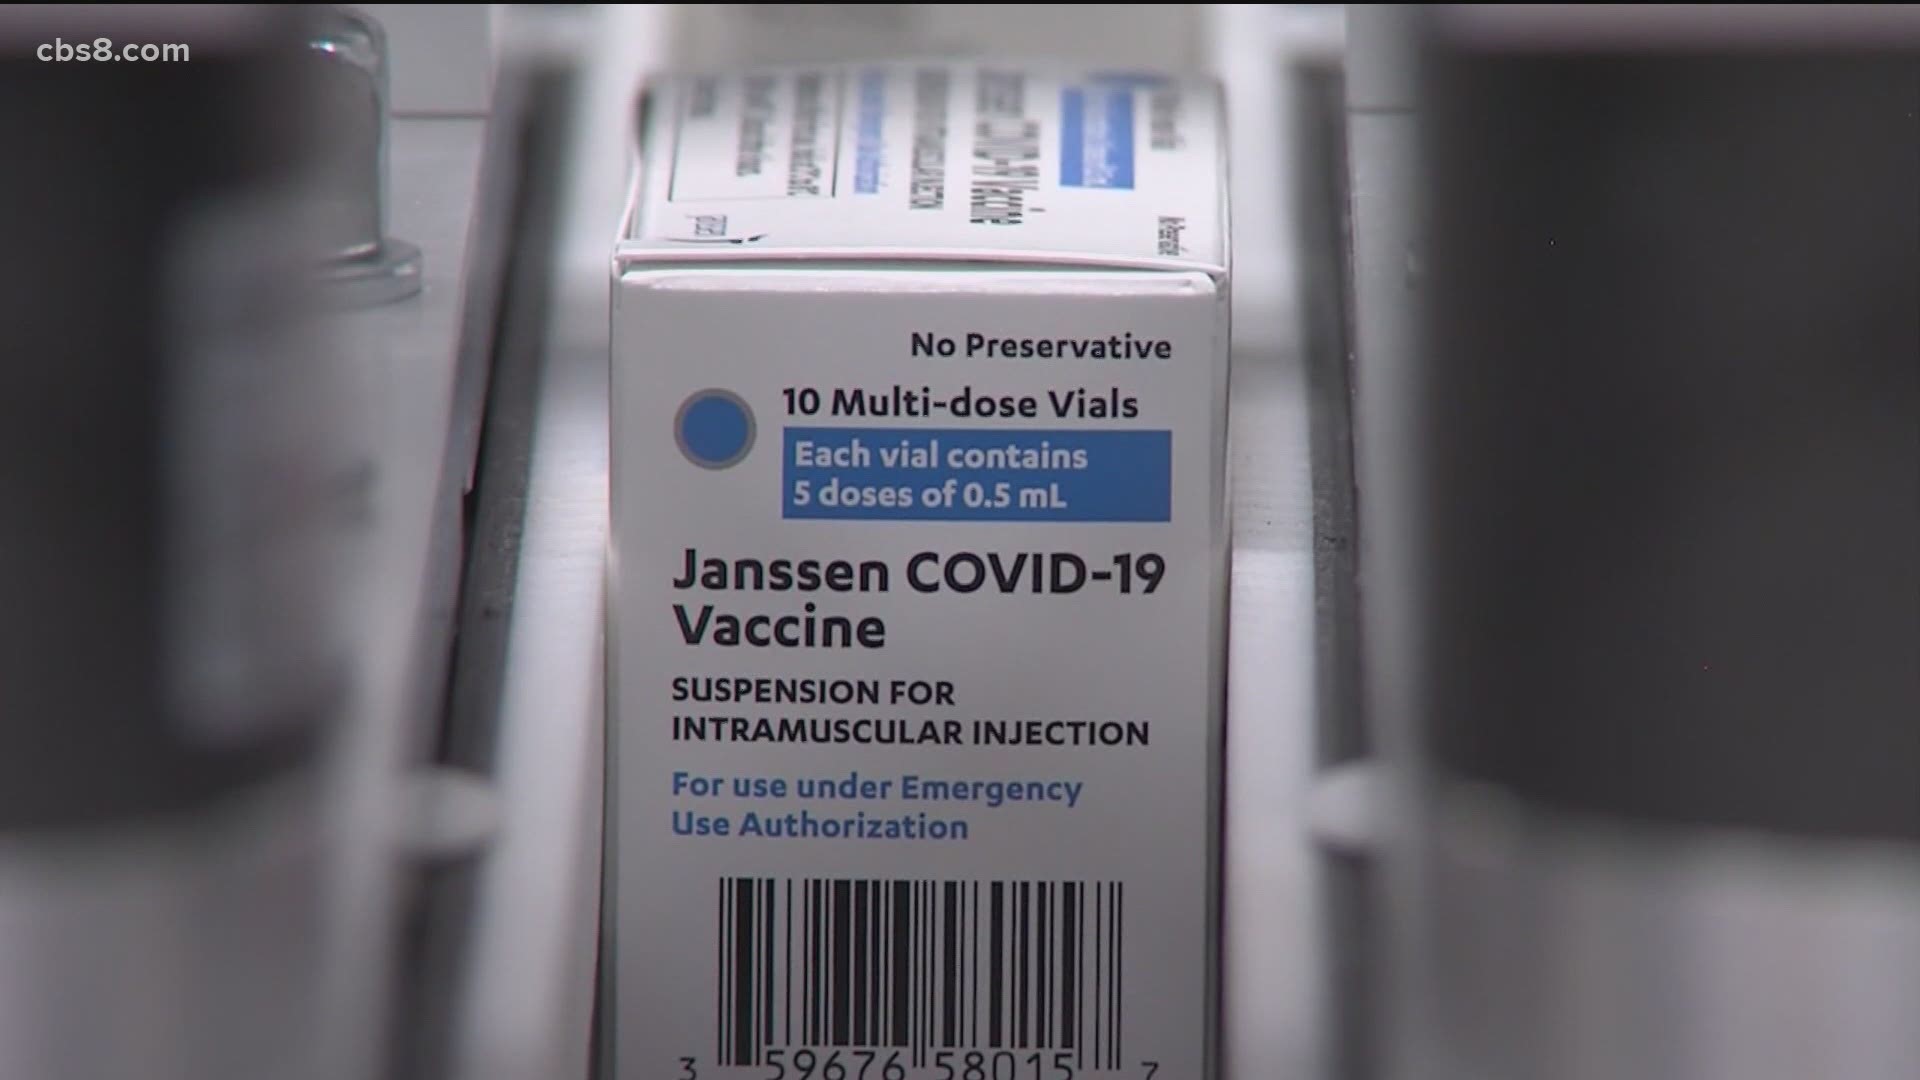 With the resumption of the Johnson & Johnson vaccine, San Diego County is opening a new vaccine site at USD.  The site will run Tues-Sat, 9 a.m. to 3:30 p.m.